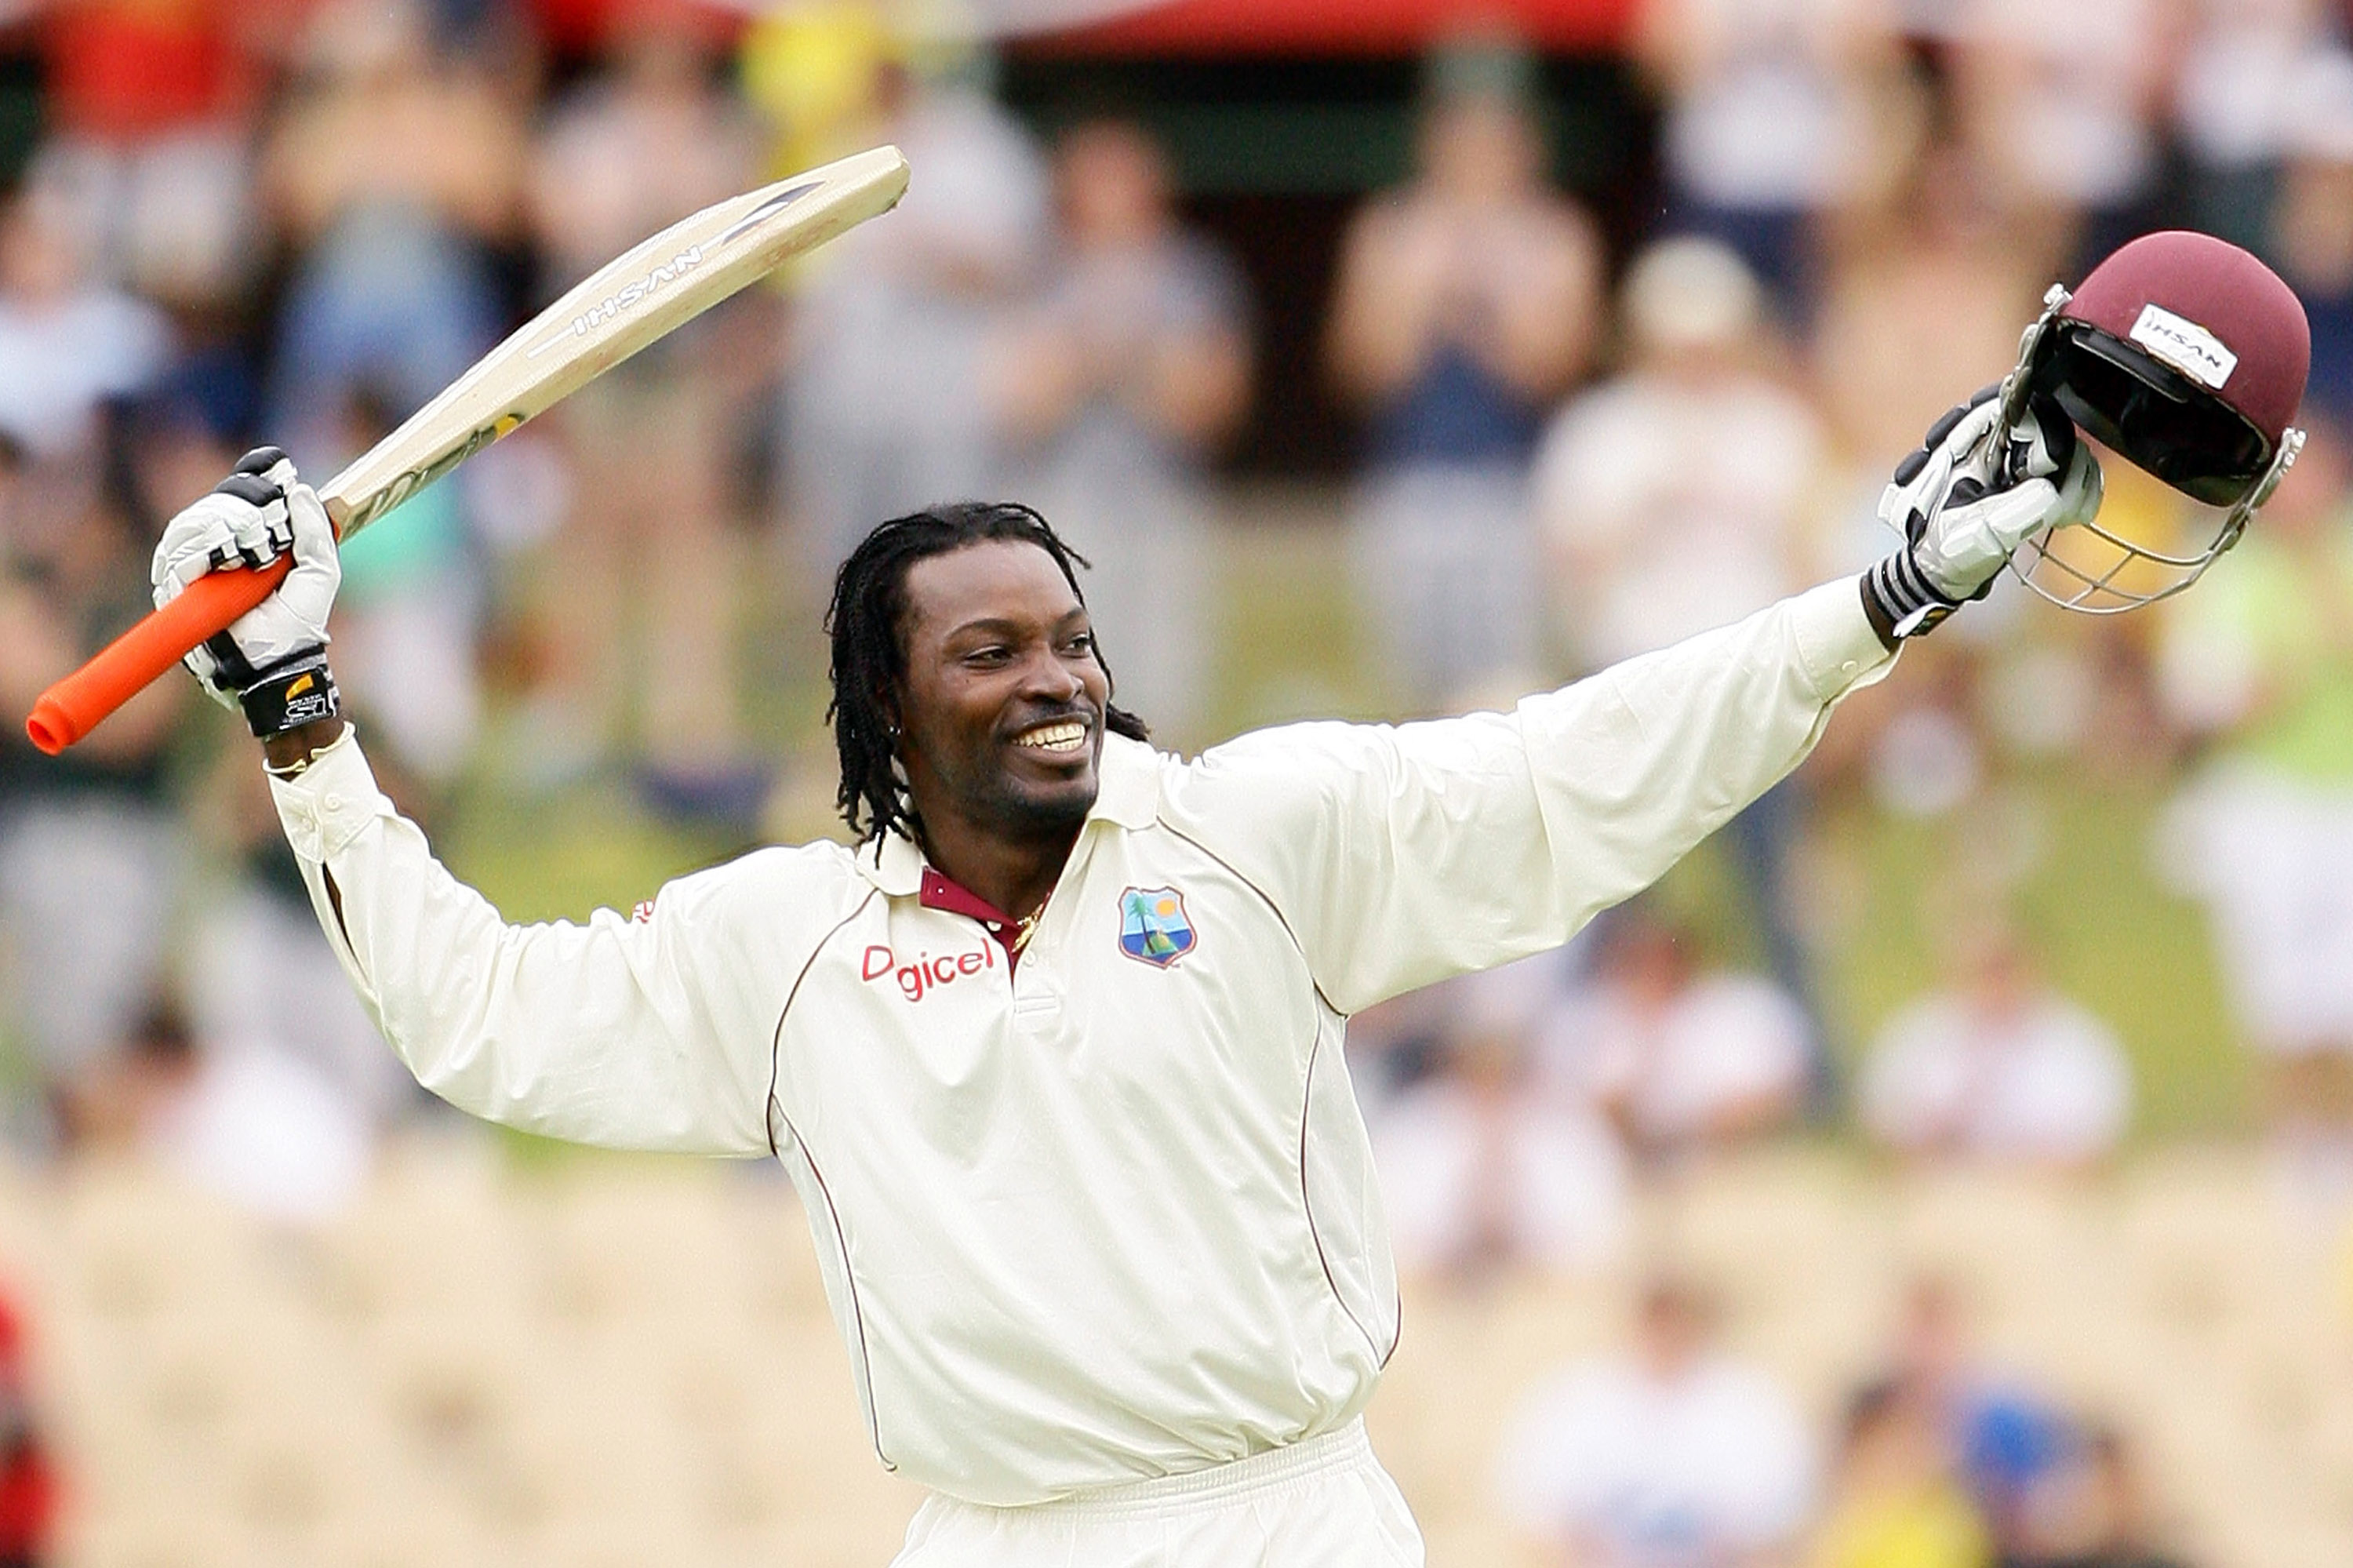 Only Gayle have a record to hit six on 1st ball of the Test Match